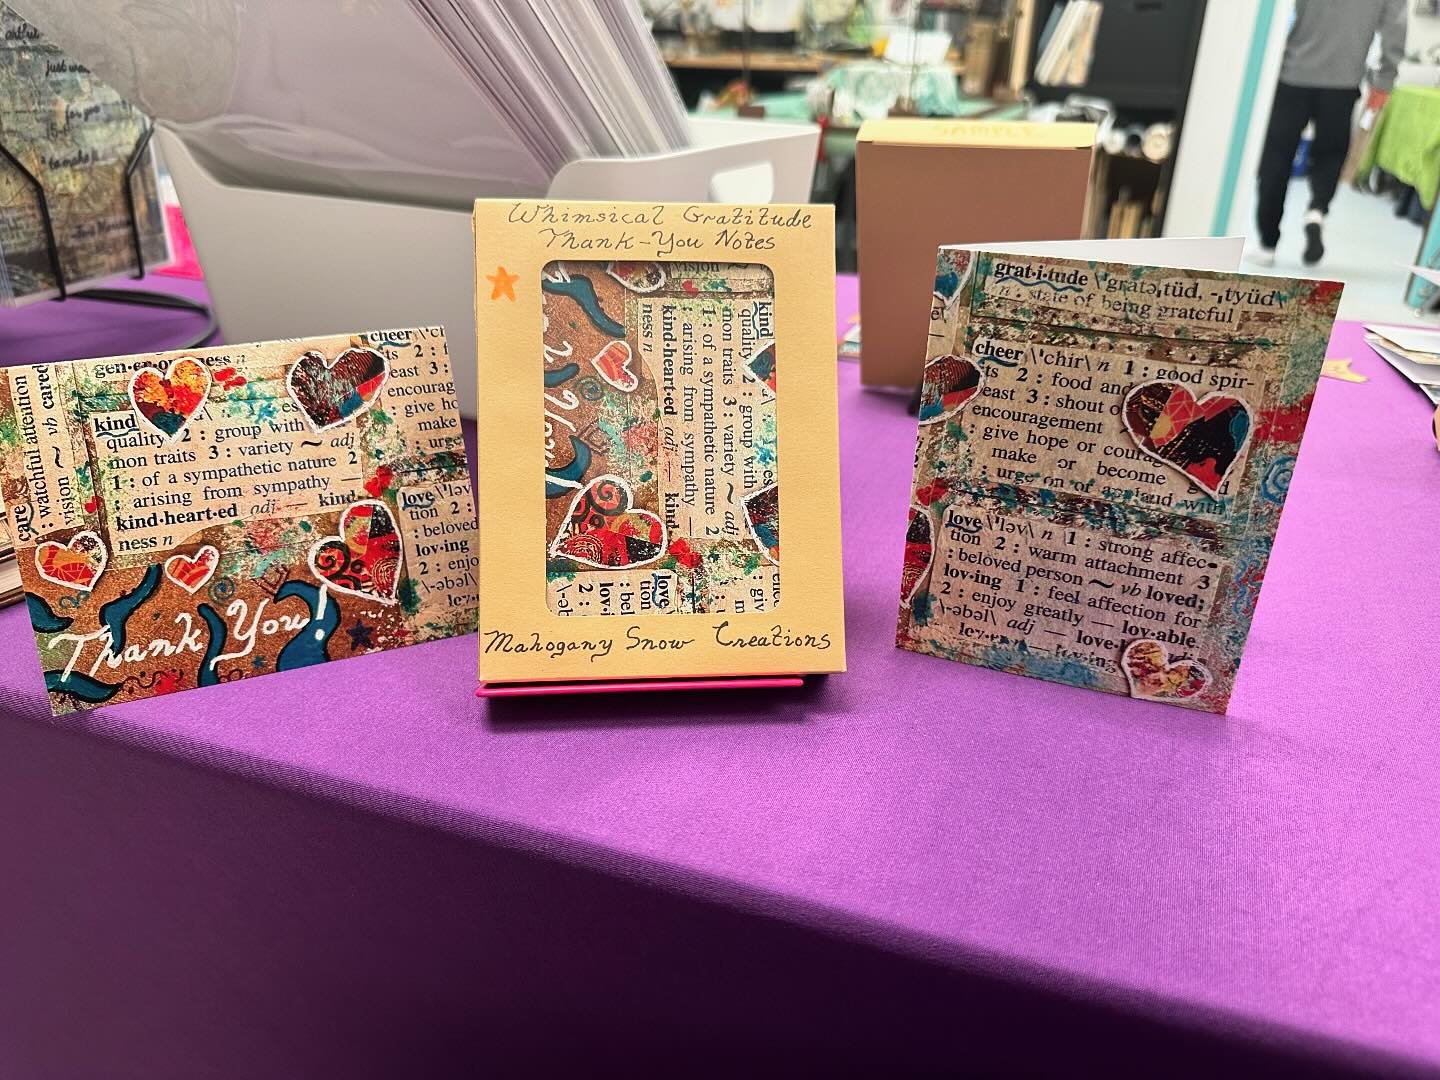 Just sold my first boxed set of cards!!! Yahoo!!😁😁 #stpaulartcrawl

https://www.mahoganysnowcreations.com/shop/boxed-set-small-notecards